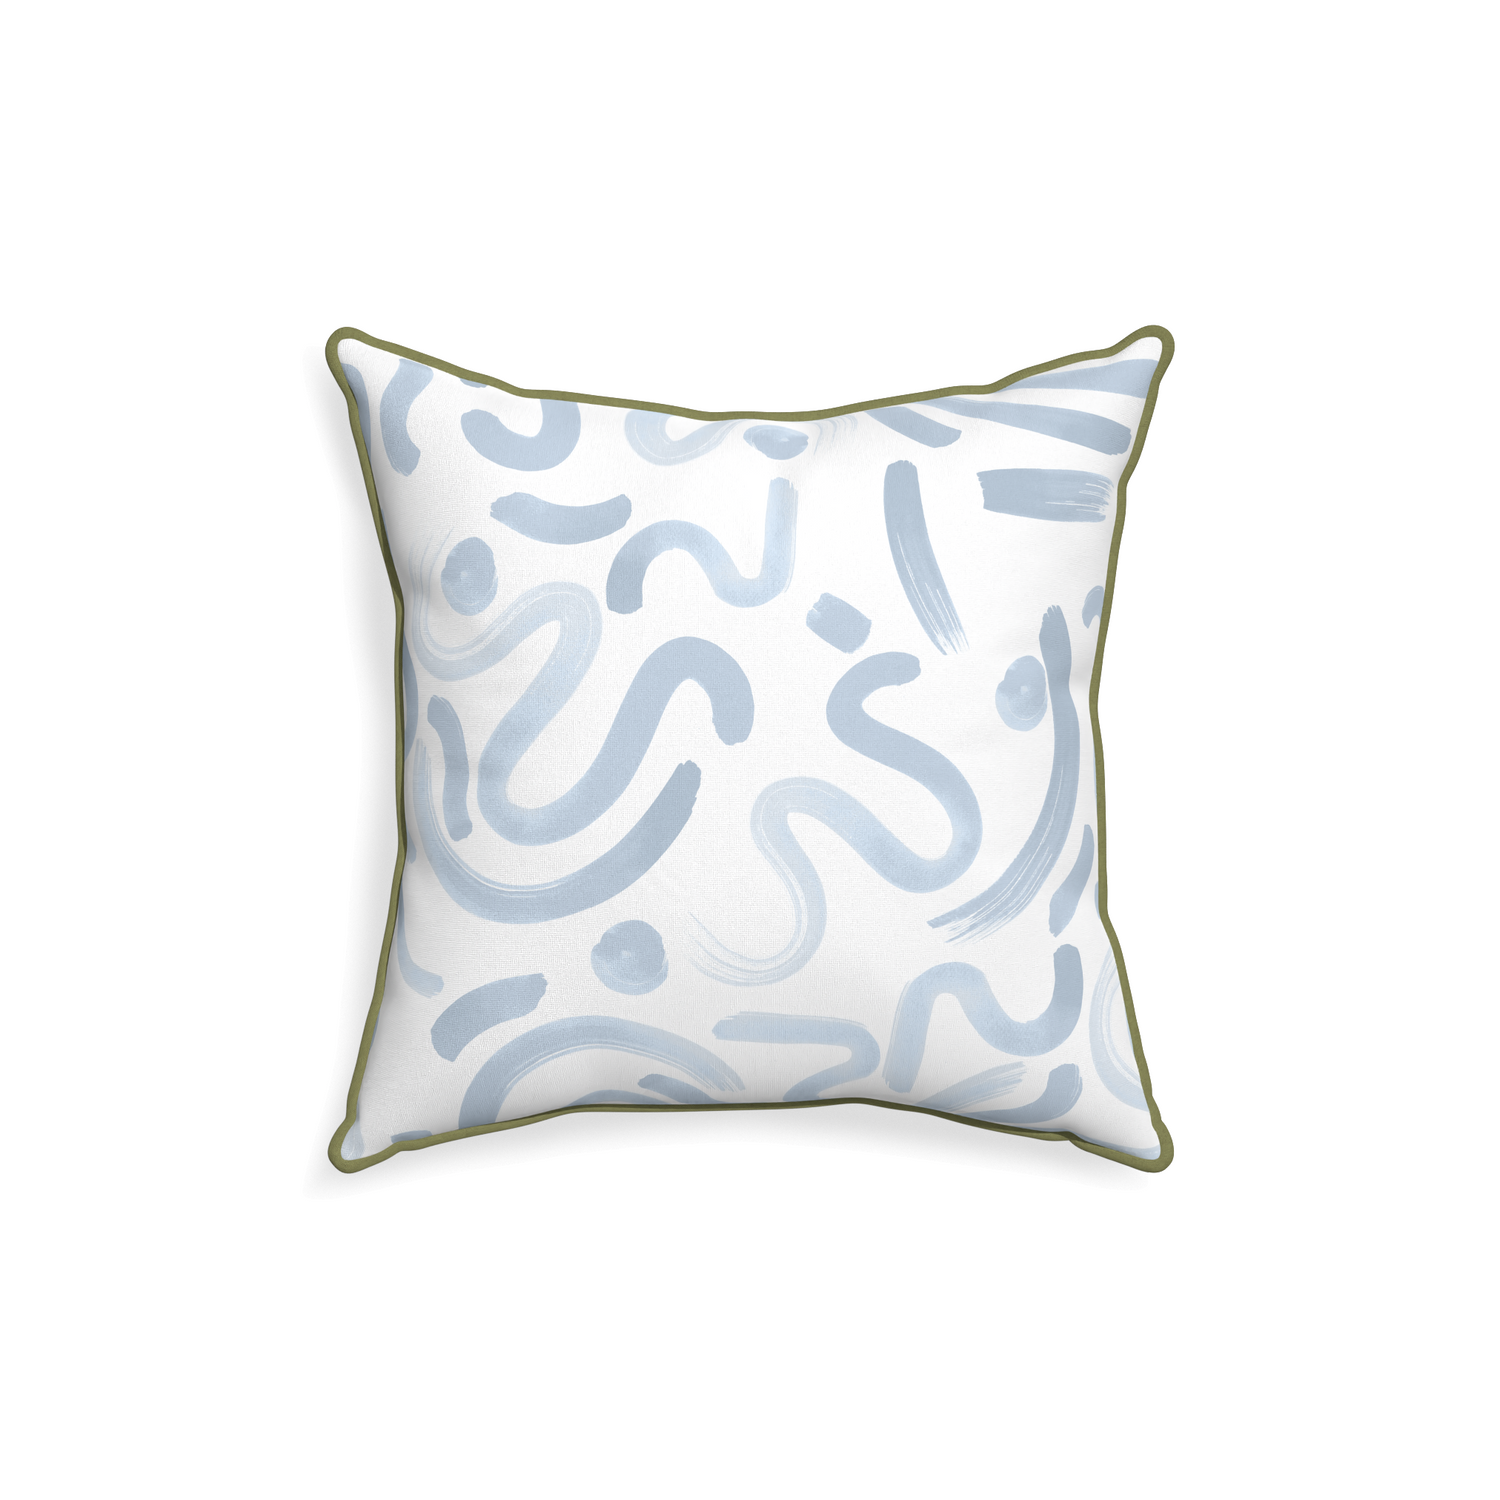 18-square hockney sky custom pillow with moss piping on white background